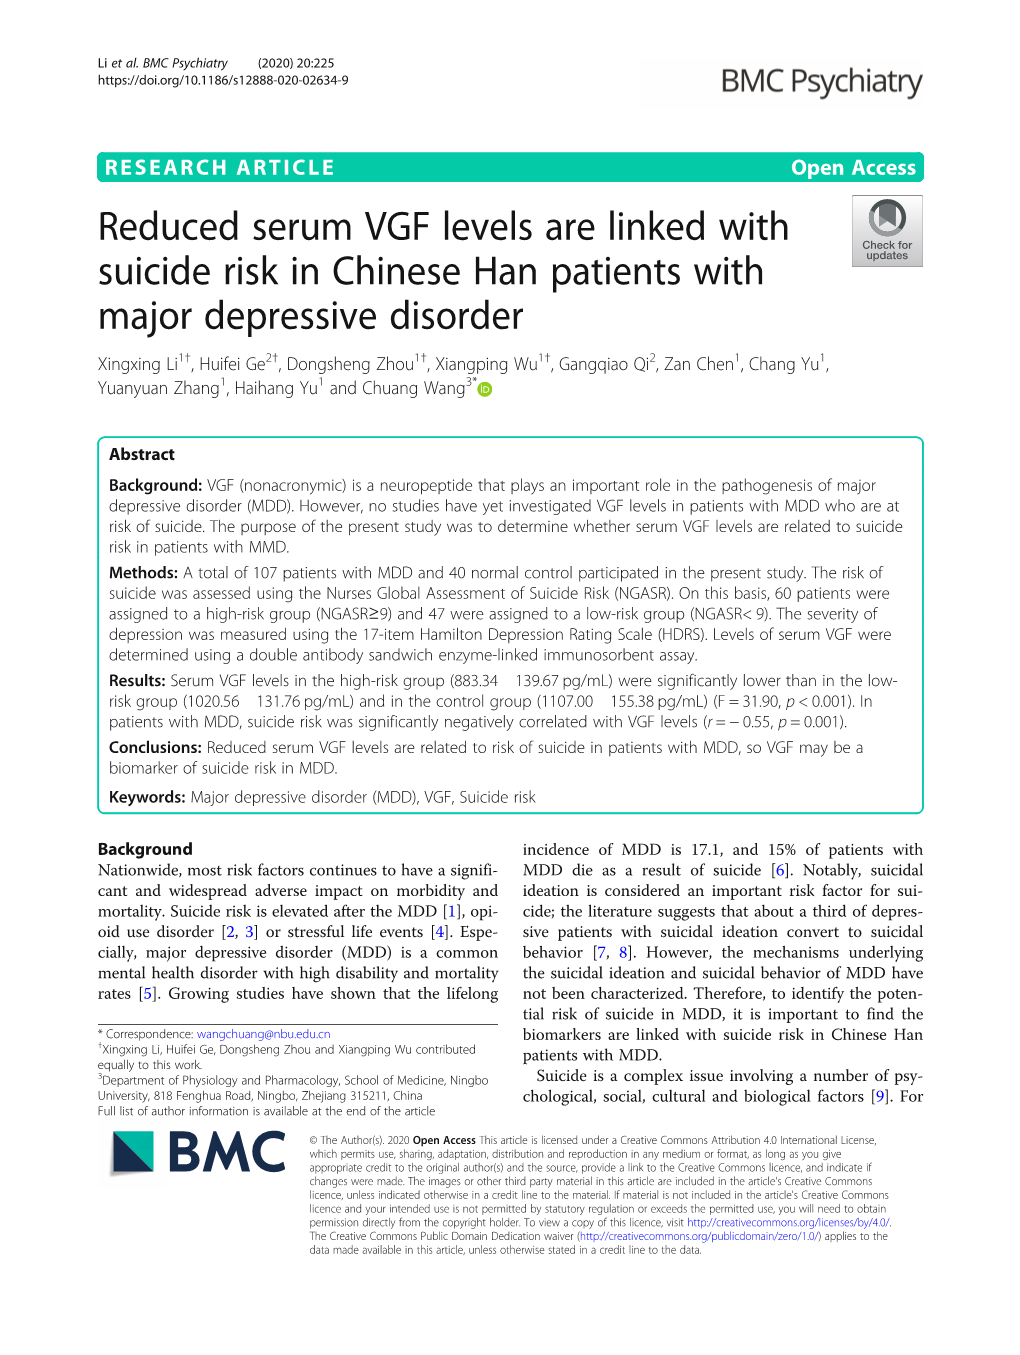 Reduced Serum VGF Levels Are Linked with Suicide Risk in Chinese Han